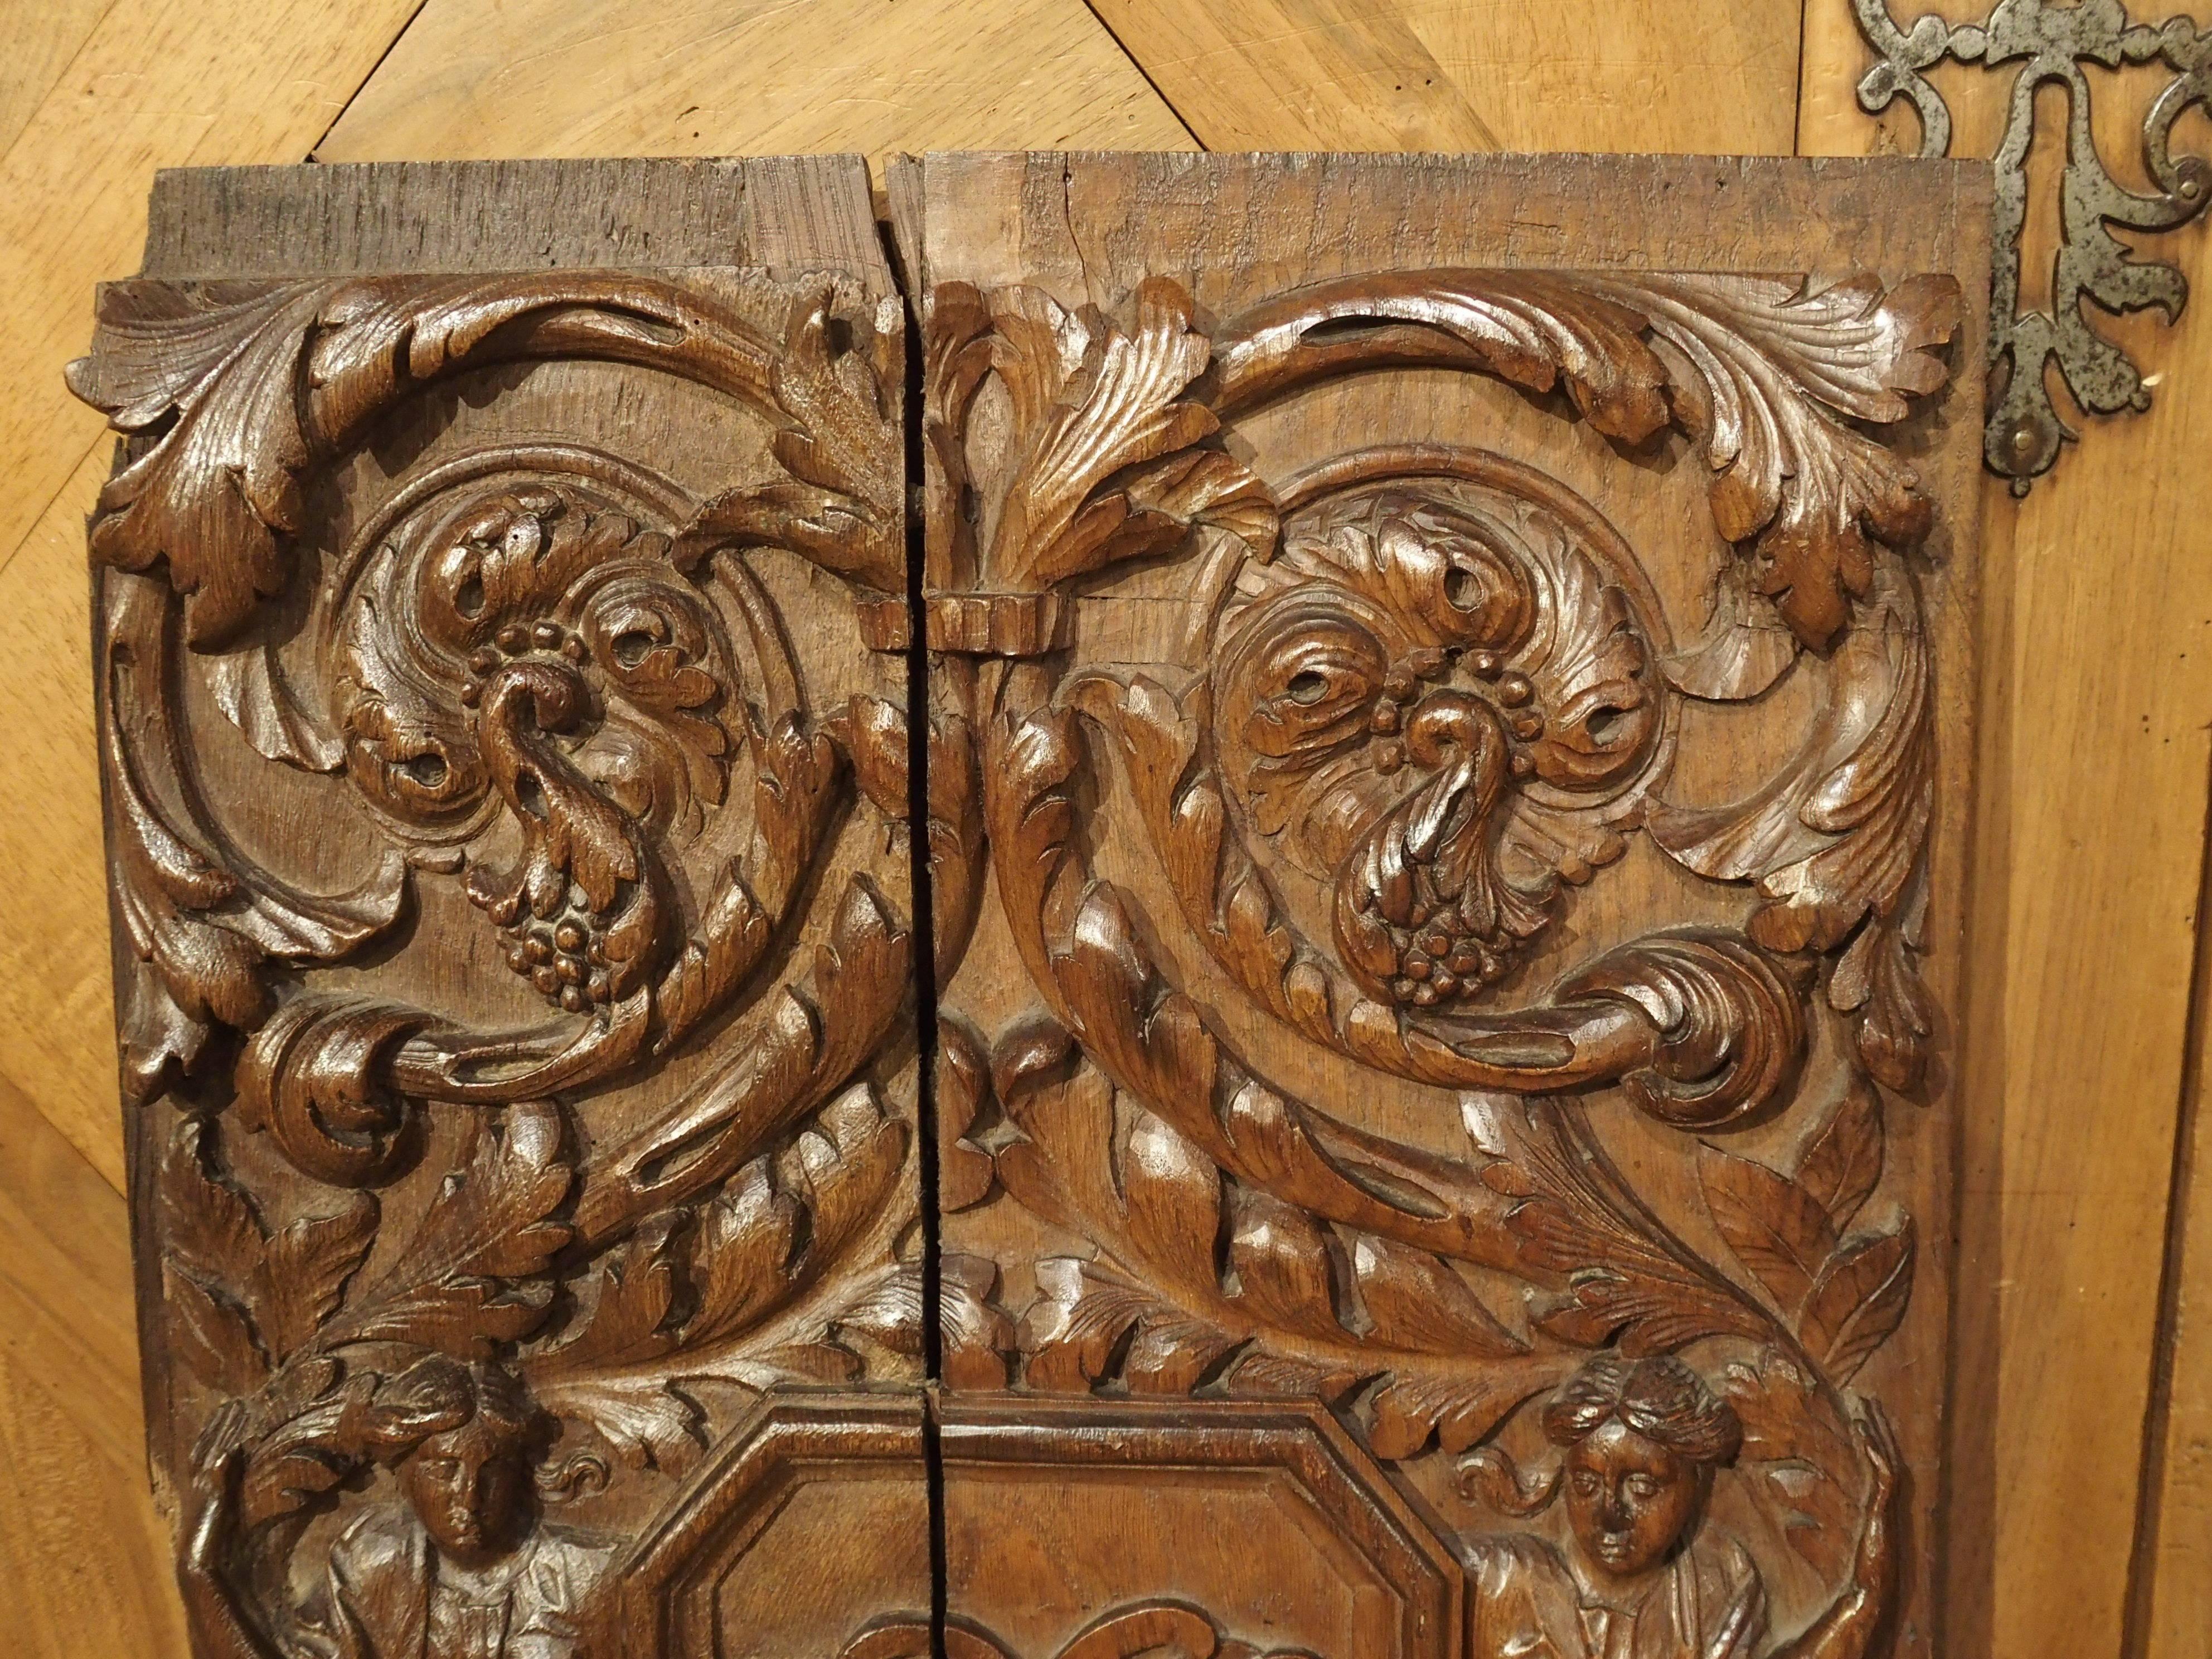 These phenomenal hand-carved architectural panels date to the 1600s. They are completely carved in relief, and they are in the Renaissance style with motifs of scrolling rinceaux at the top and bottom. In the middle of each is a canted panel with a